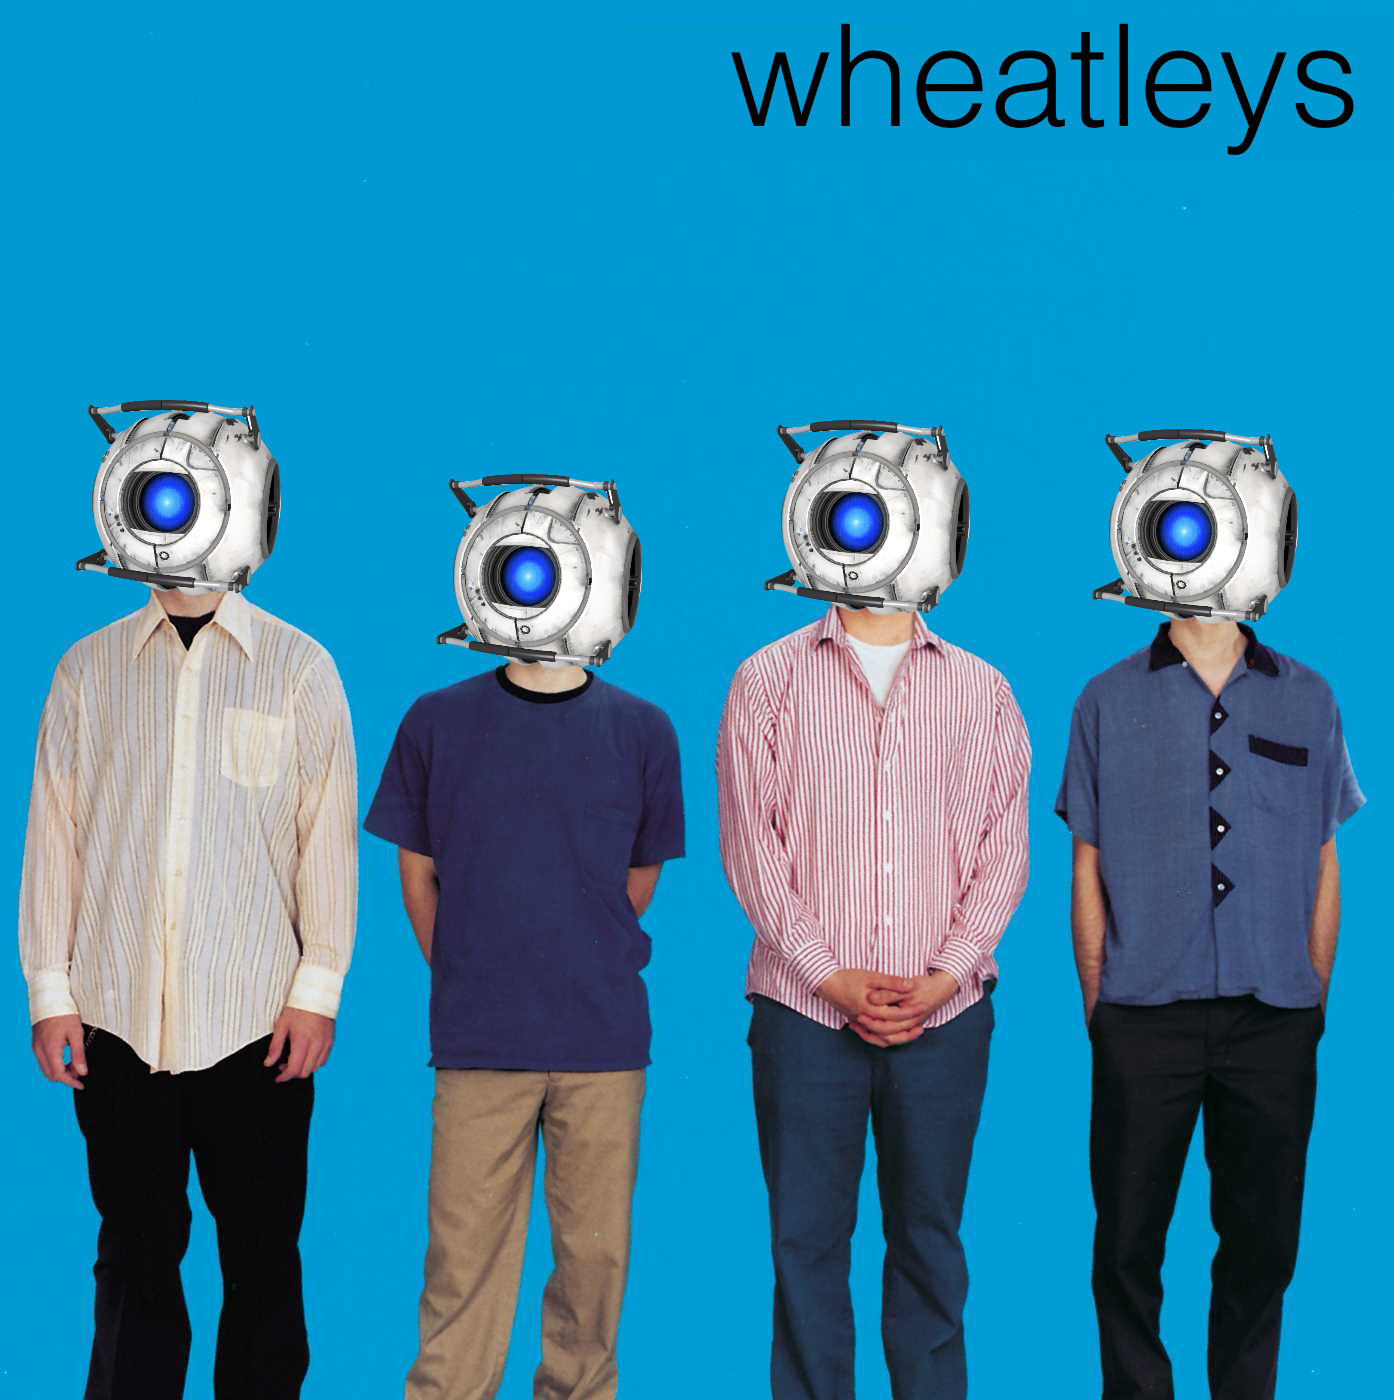 The Weezer Blue Album cover except it says 'wheatleys' and all the band member's heads have been replaced with Wheatley